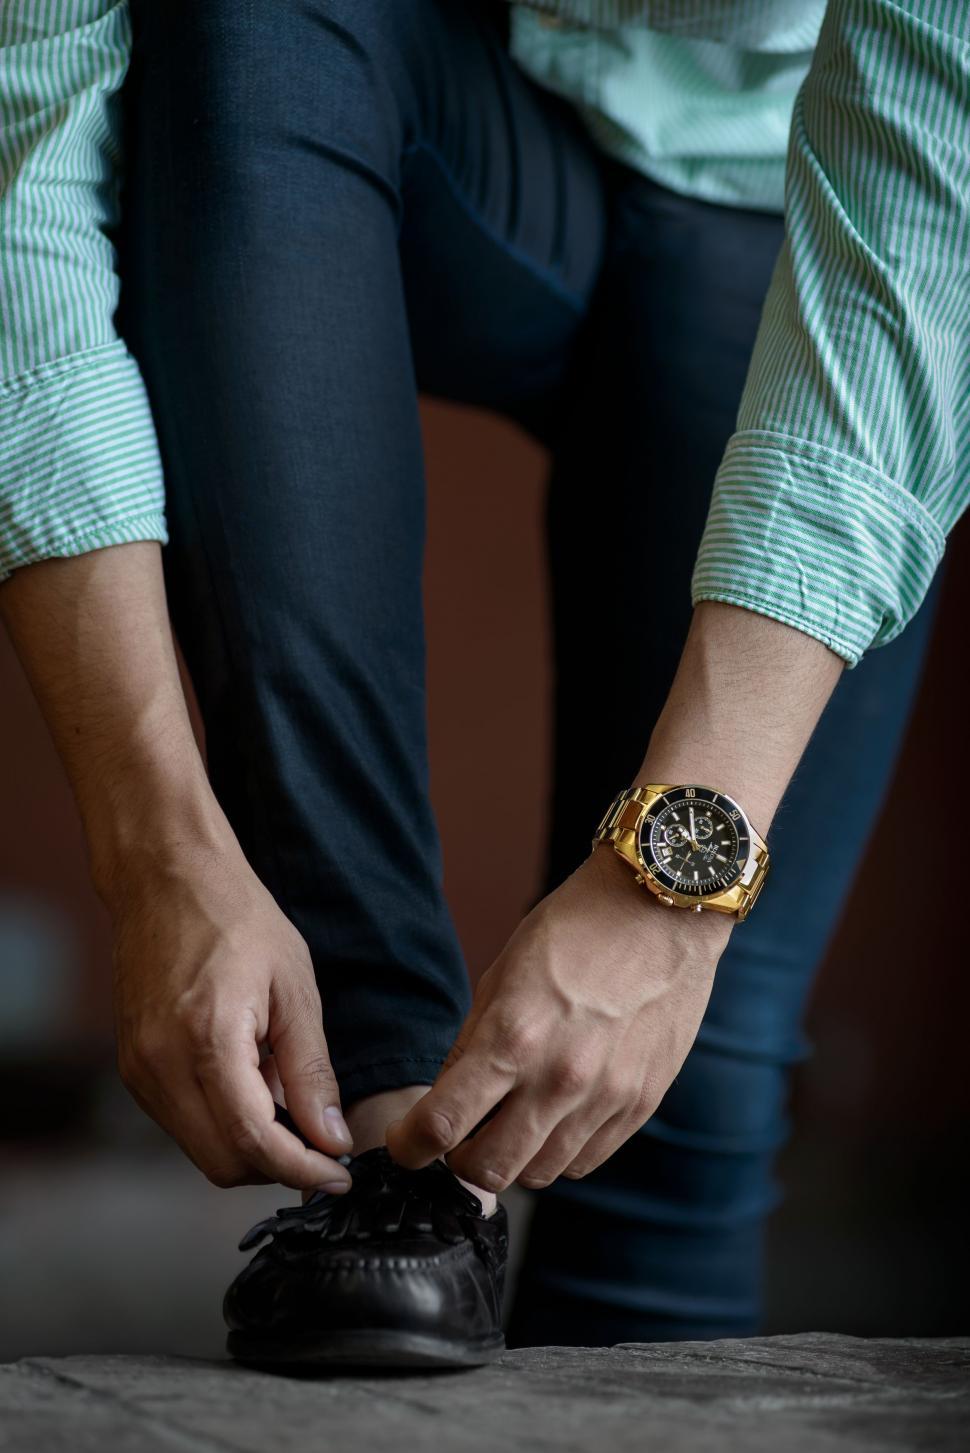 Free Image of Man Tying Shoes With Watch on Wrist 